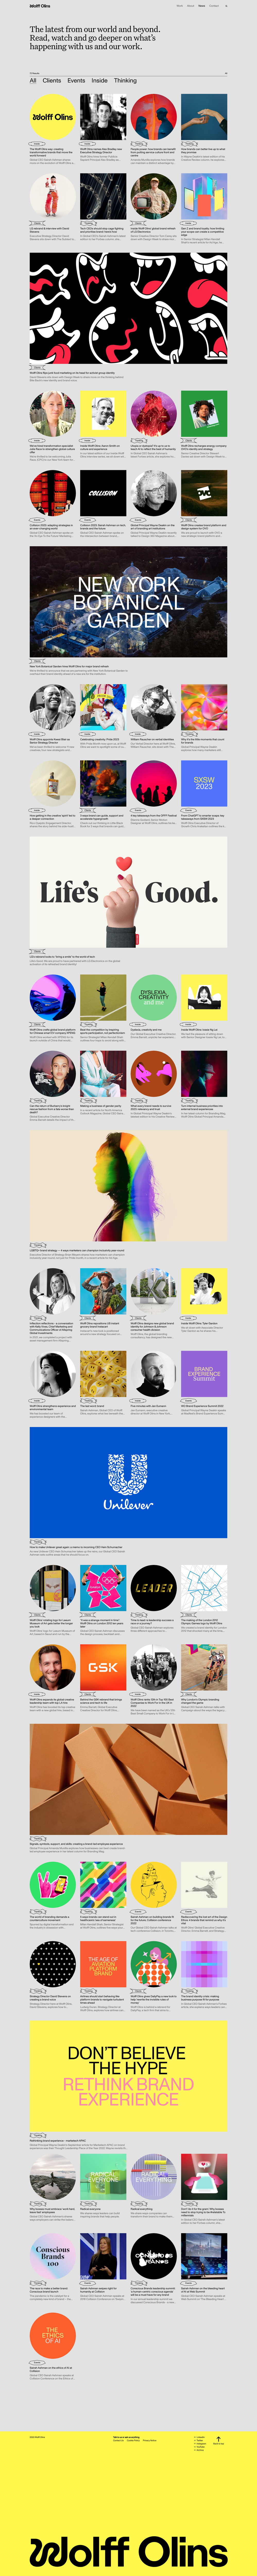 Wolff Olins Landing Page Example: We create transformative brands that move organisations, people and the world forward.